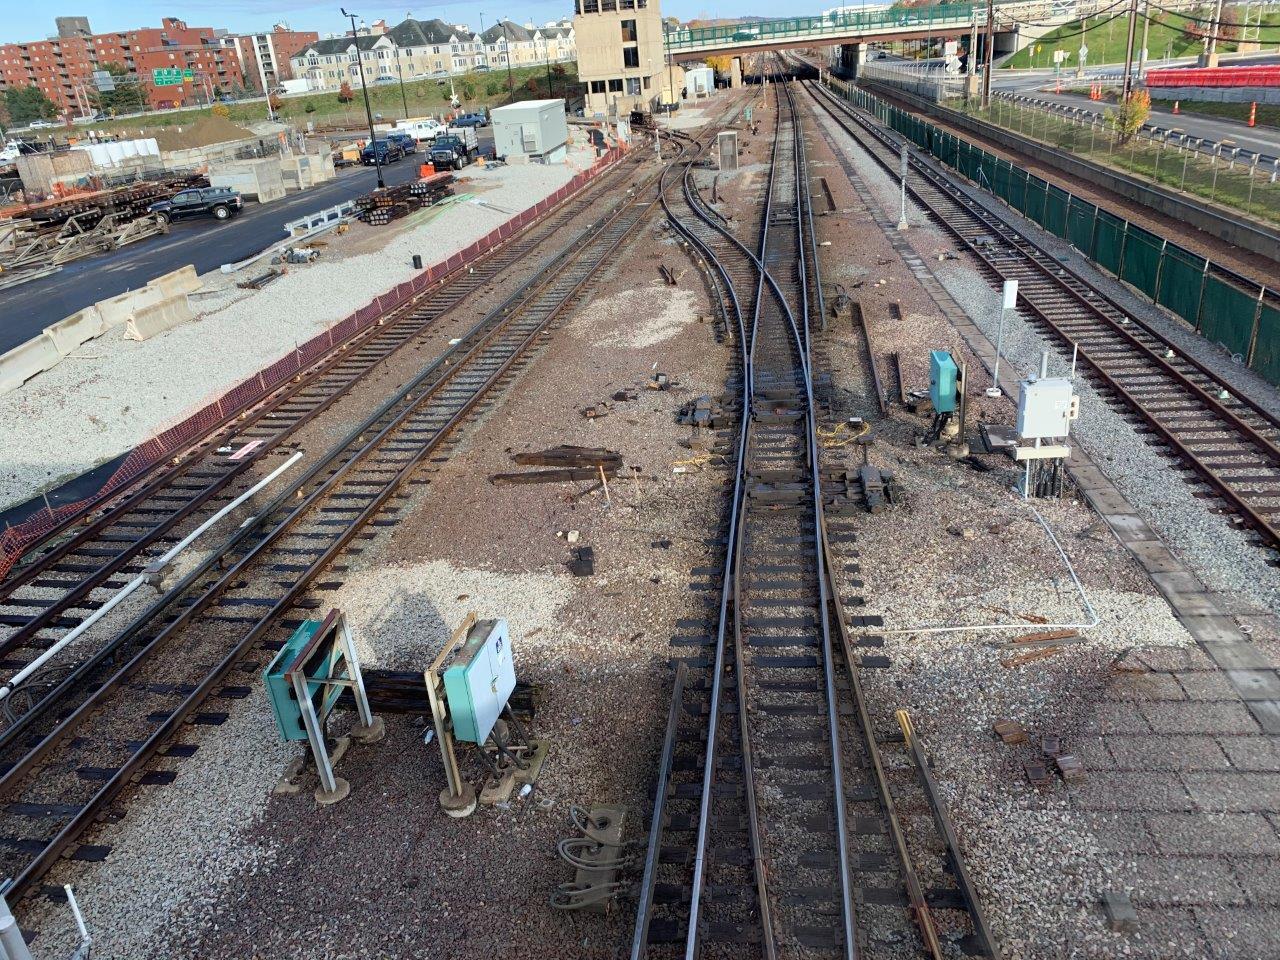 The crossovers that allow trains to move from Wellington Yard onto the main tracks need to be replaced